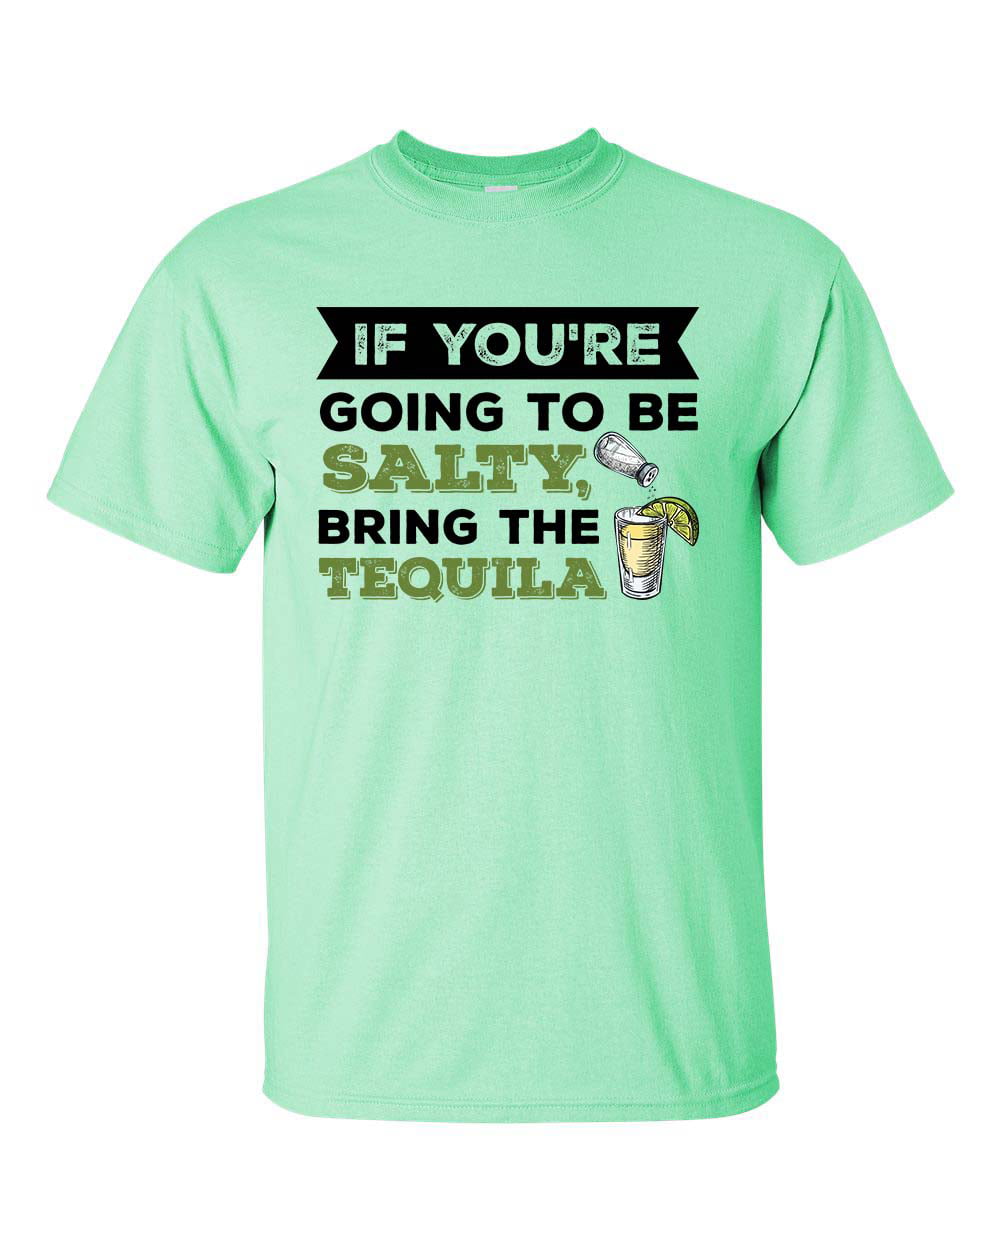 If You're Going To Be Salty Bring Tequila Download Drinking shirt Summer margarita